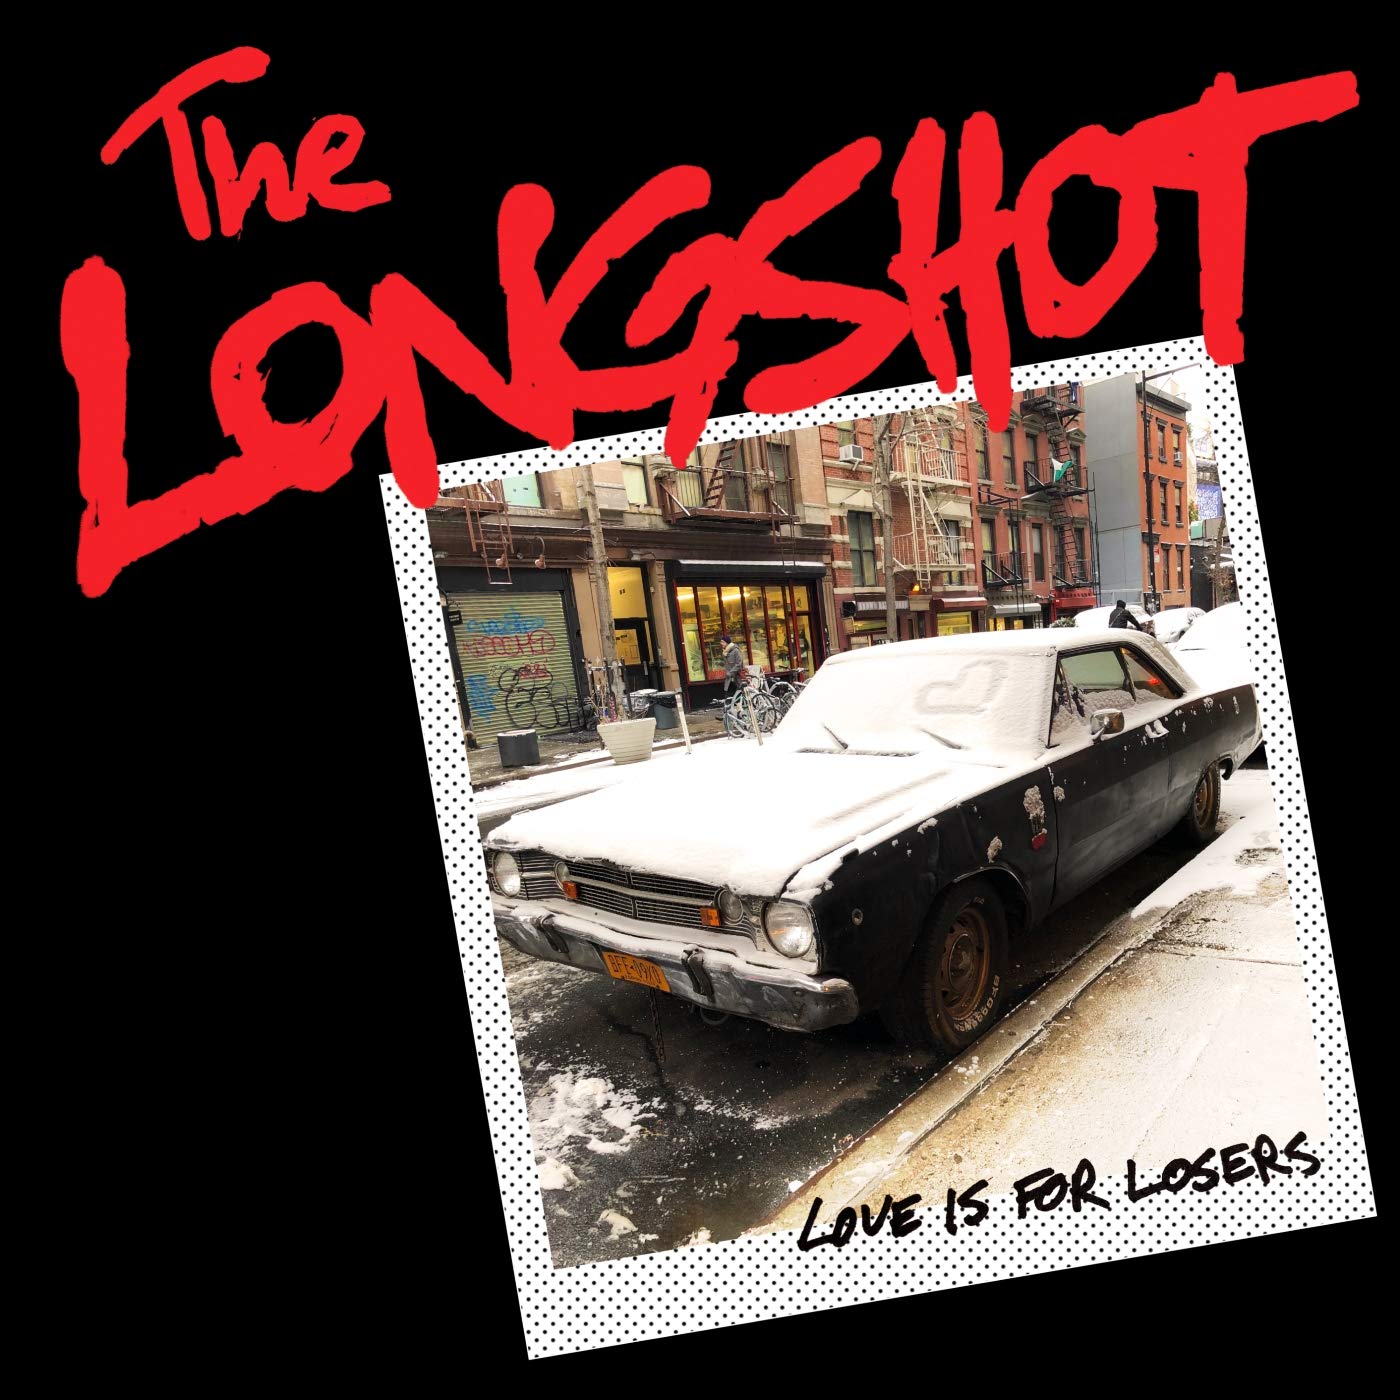 The Longshot - Love Is for Losers (2018)